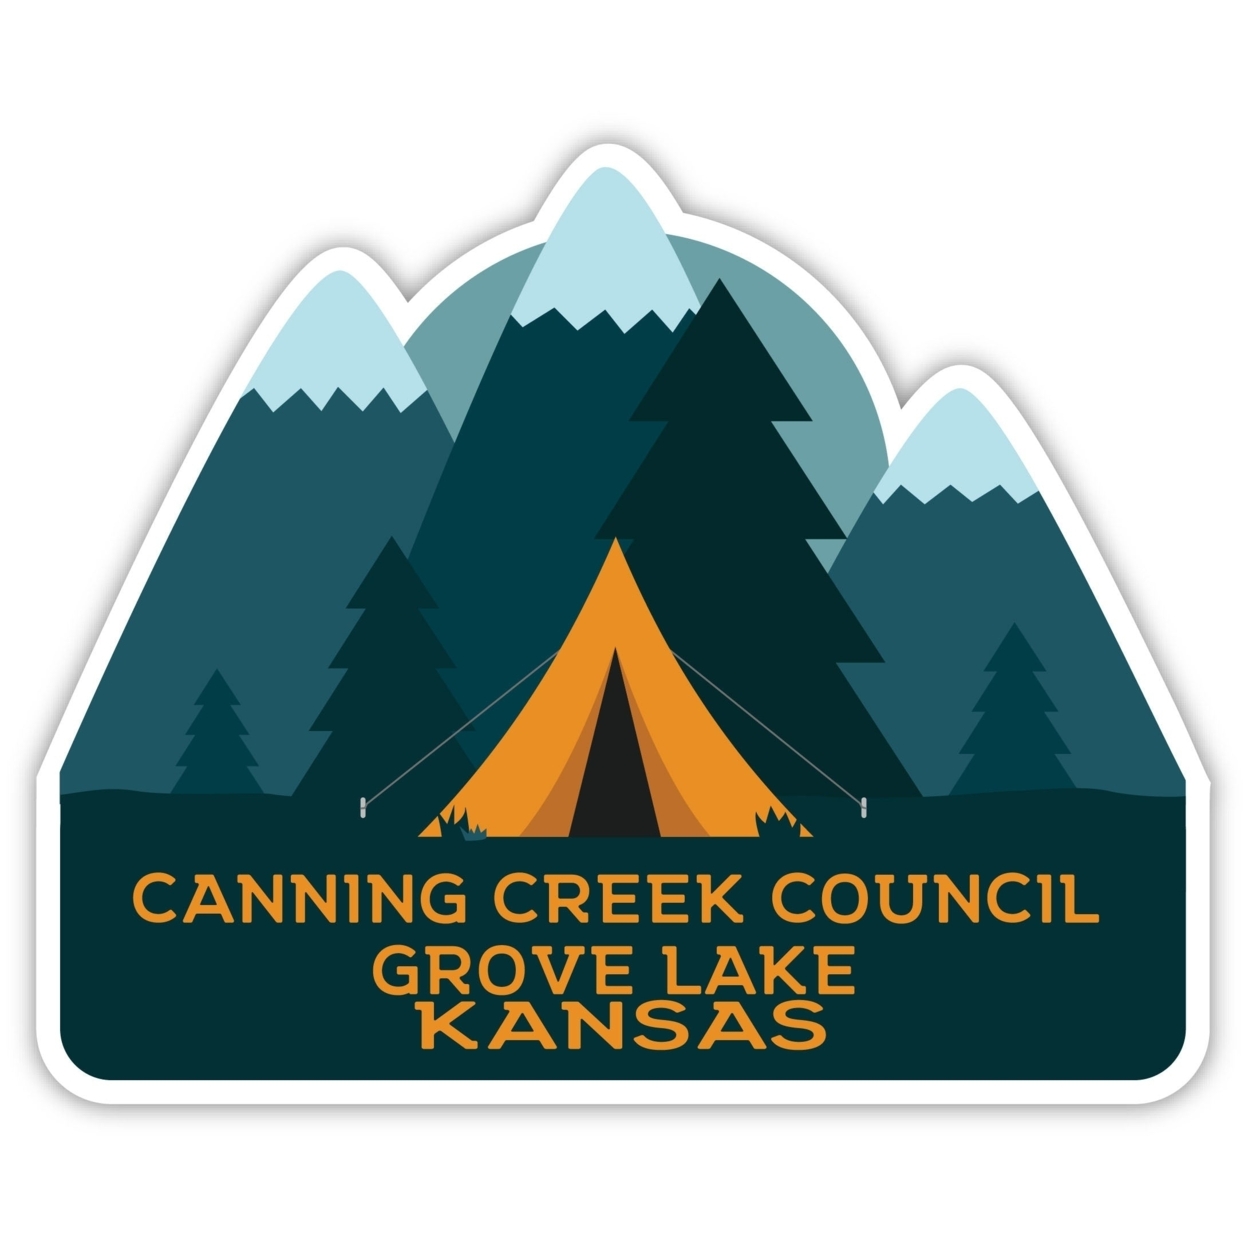 Canning Creek Council Grove Lake Kansas Souvenir Decorative Stickers (Choose Theme And Size) - 4-Pack, 4-Inch, Tent